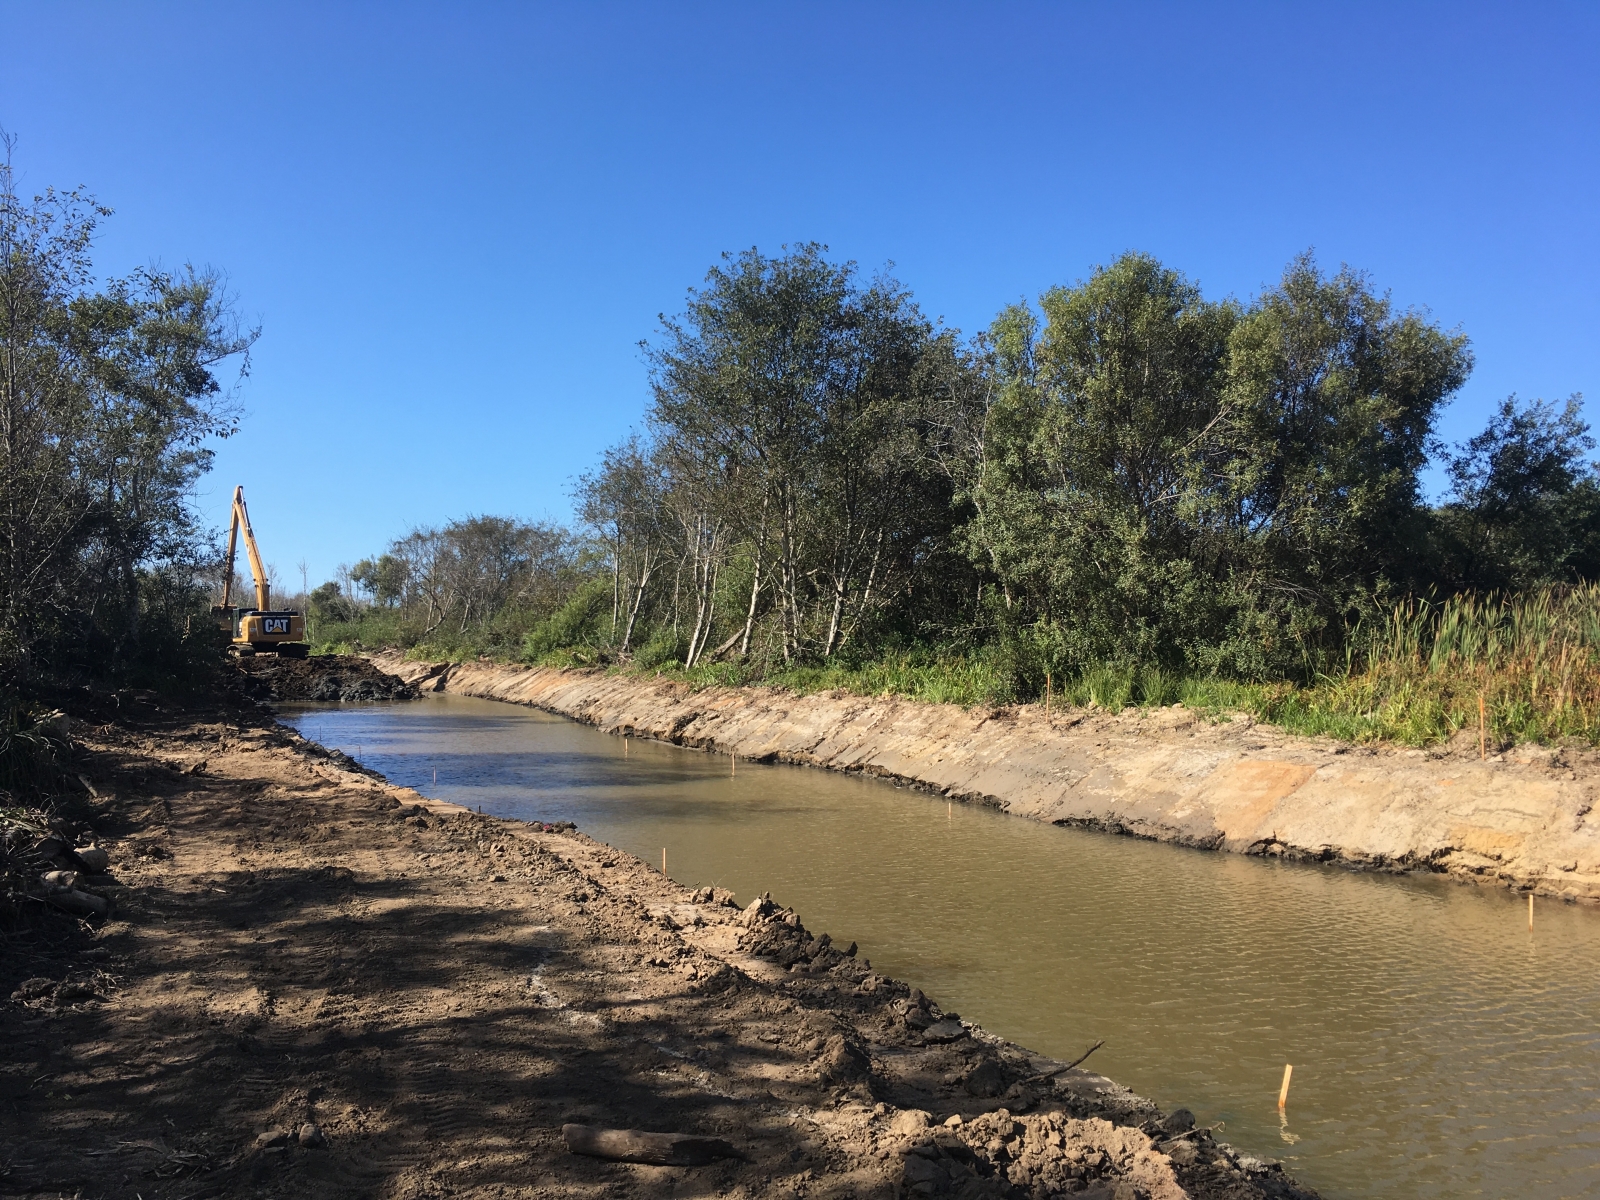 Upper Reach Excavation - Looking downstream from Pescadero Creek Rd. Bridge, the excavator completes final excavation of the Butano channel.September 2019